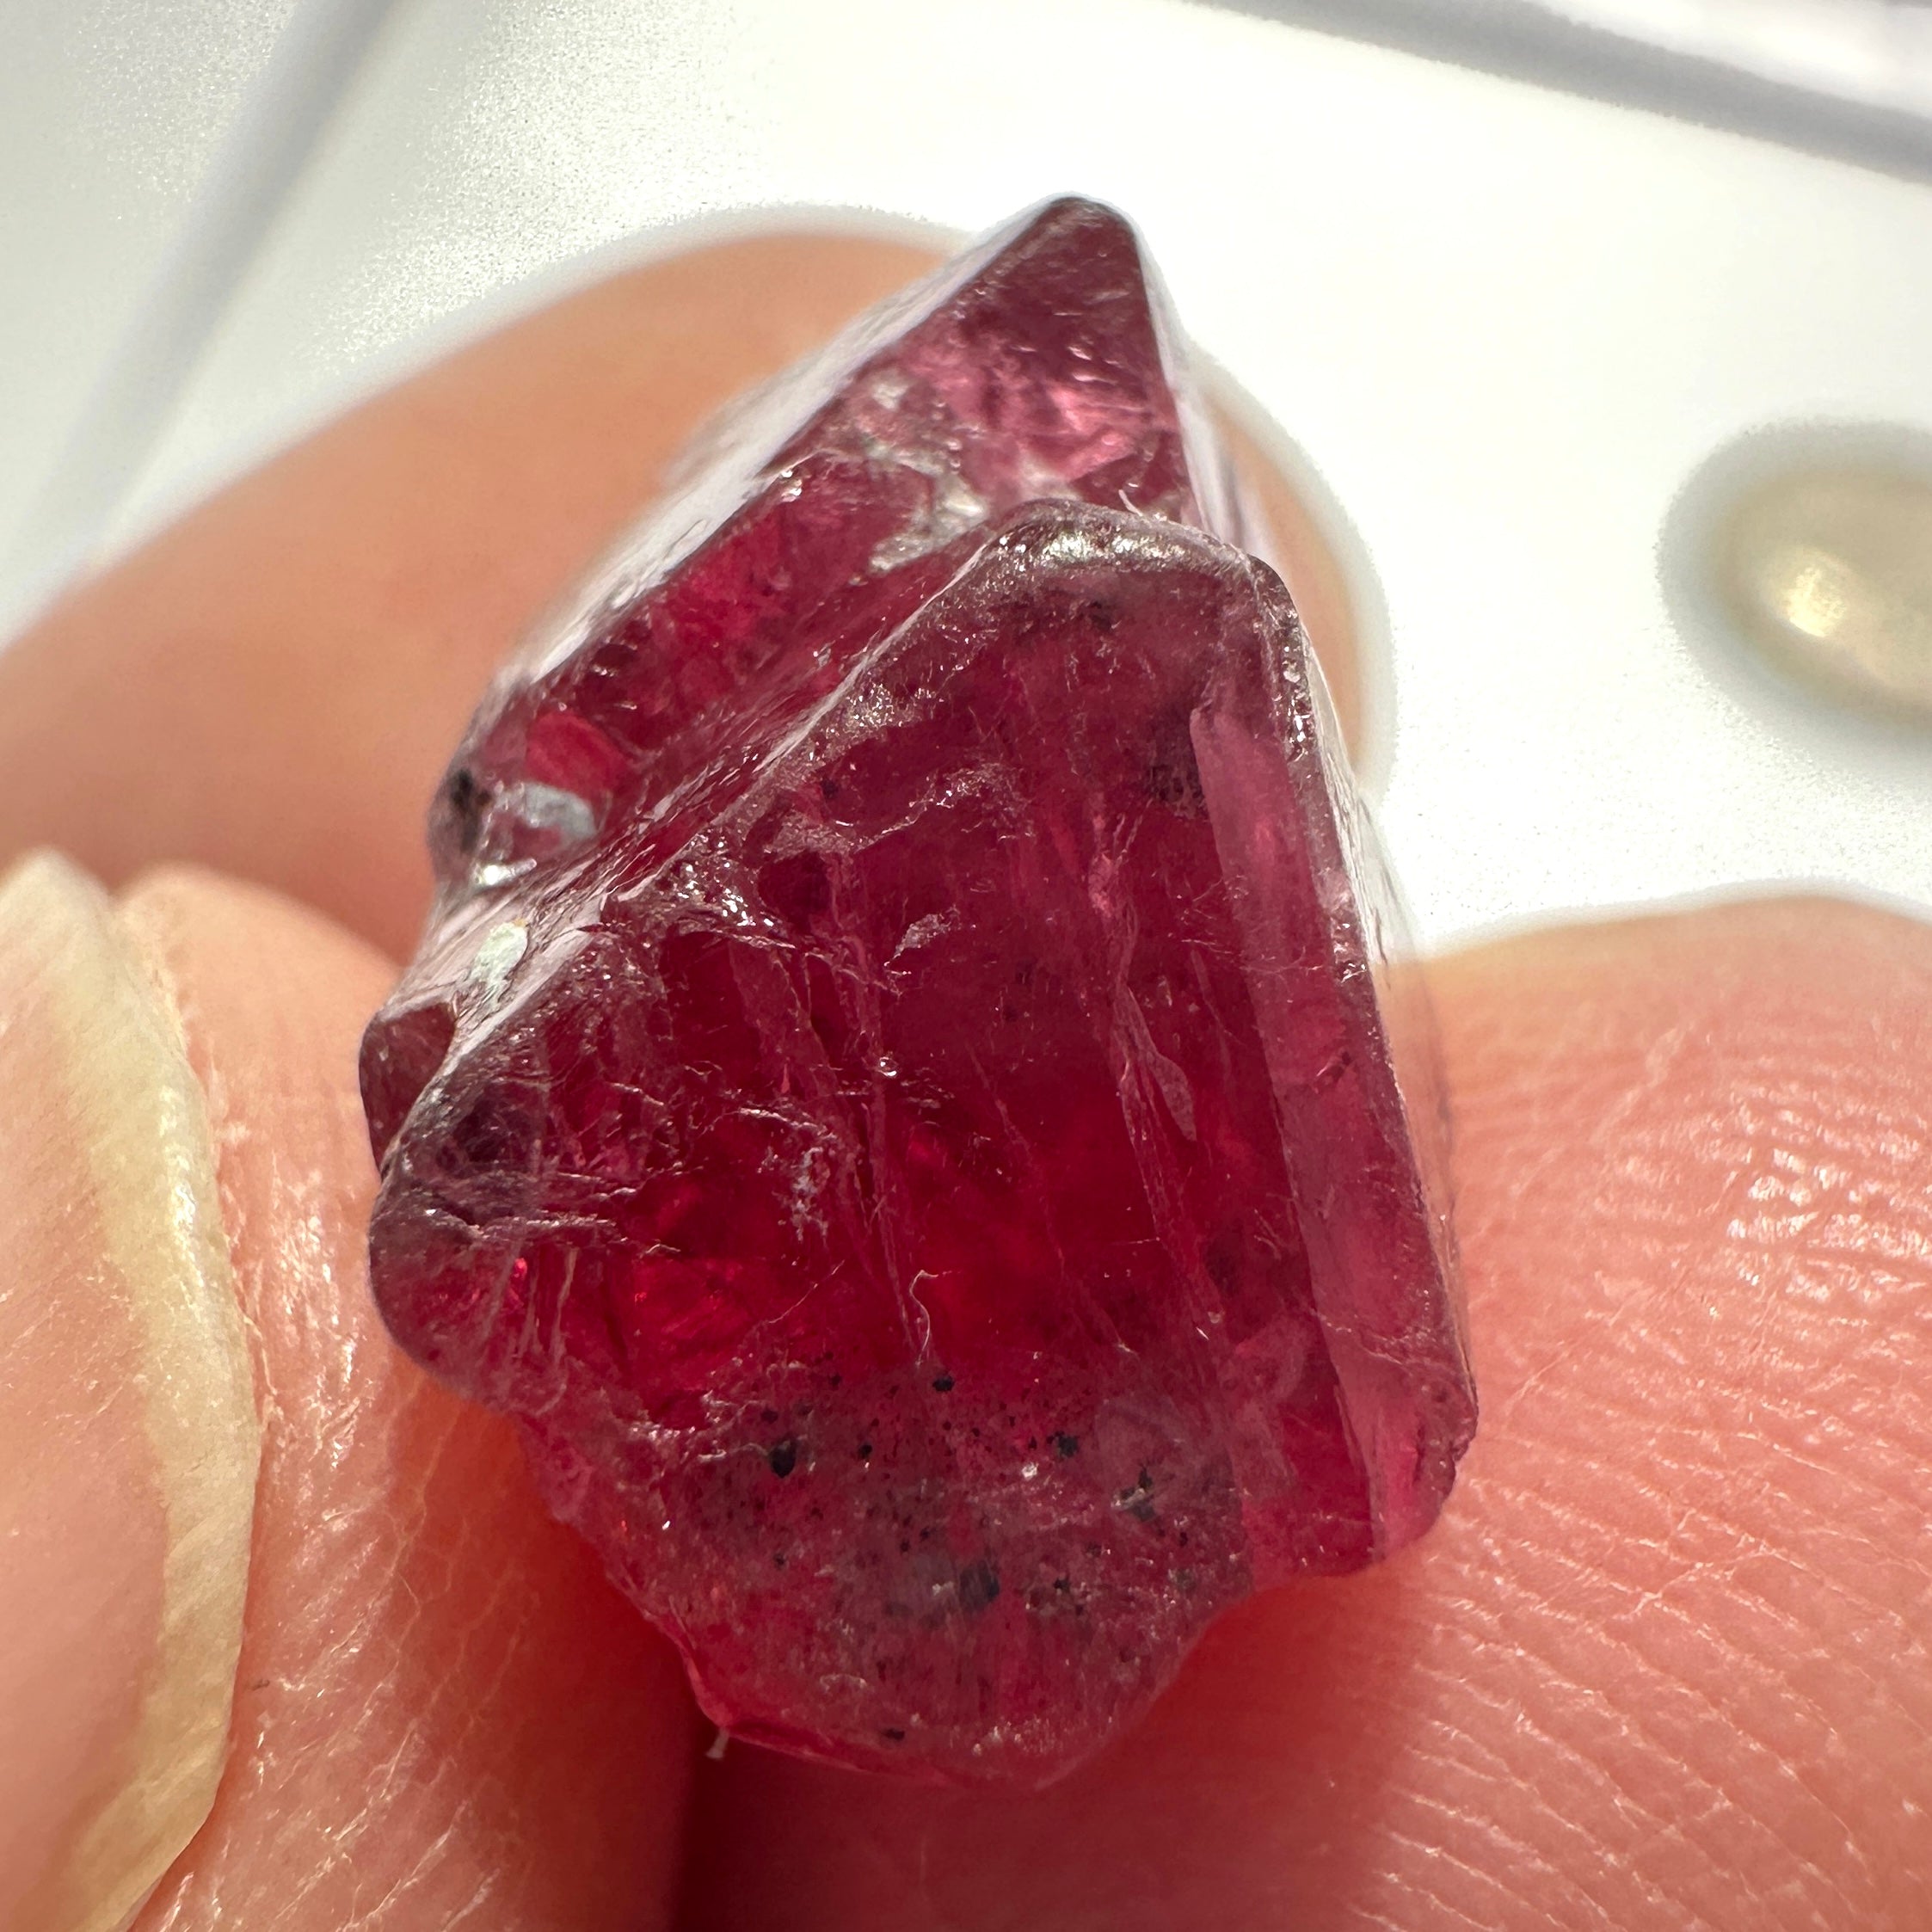 13.48ct Mahenge Red Spinel Crystal, Twin Crystal, Mahenge, Tanzania, Untreated Unheated - Tiny Facetable Portions. 15.9 x 9 x 8.8 mm